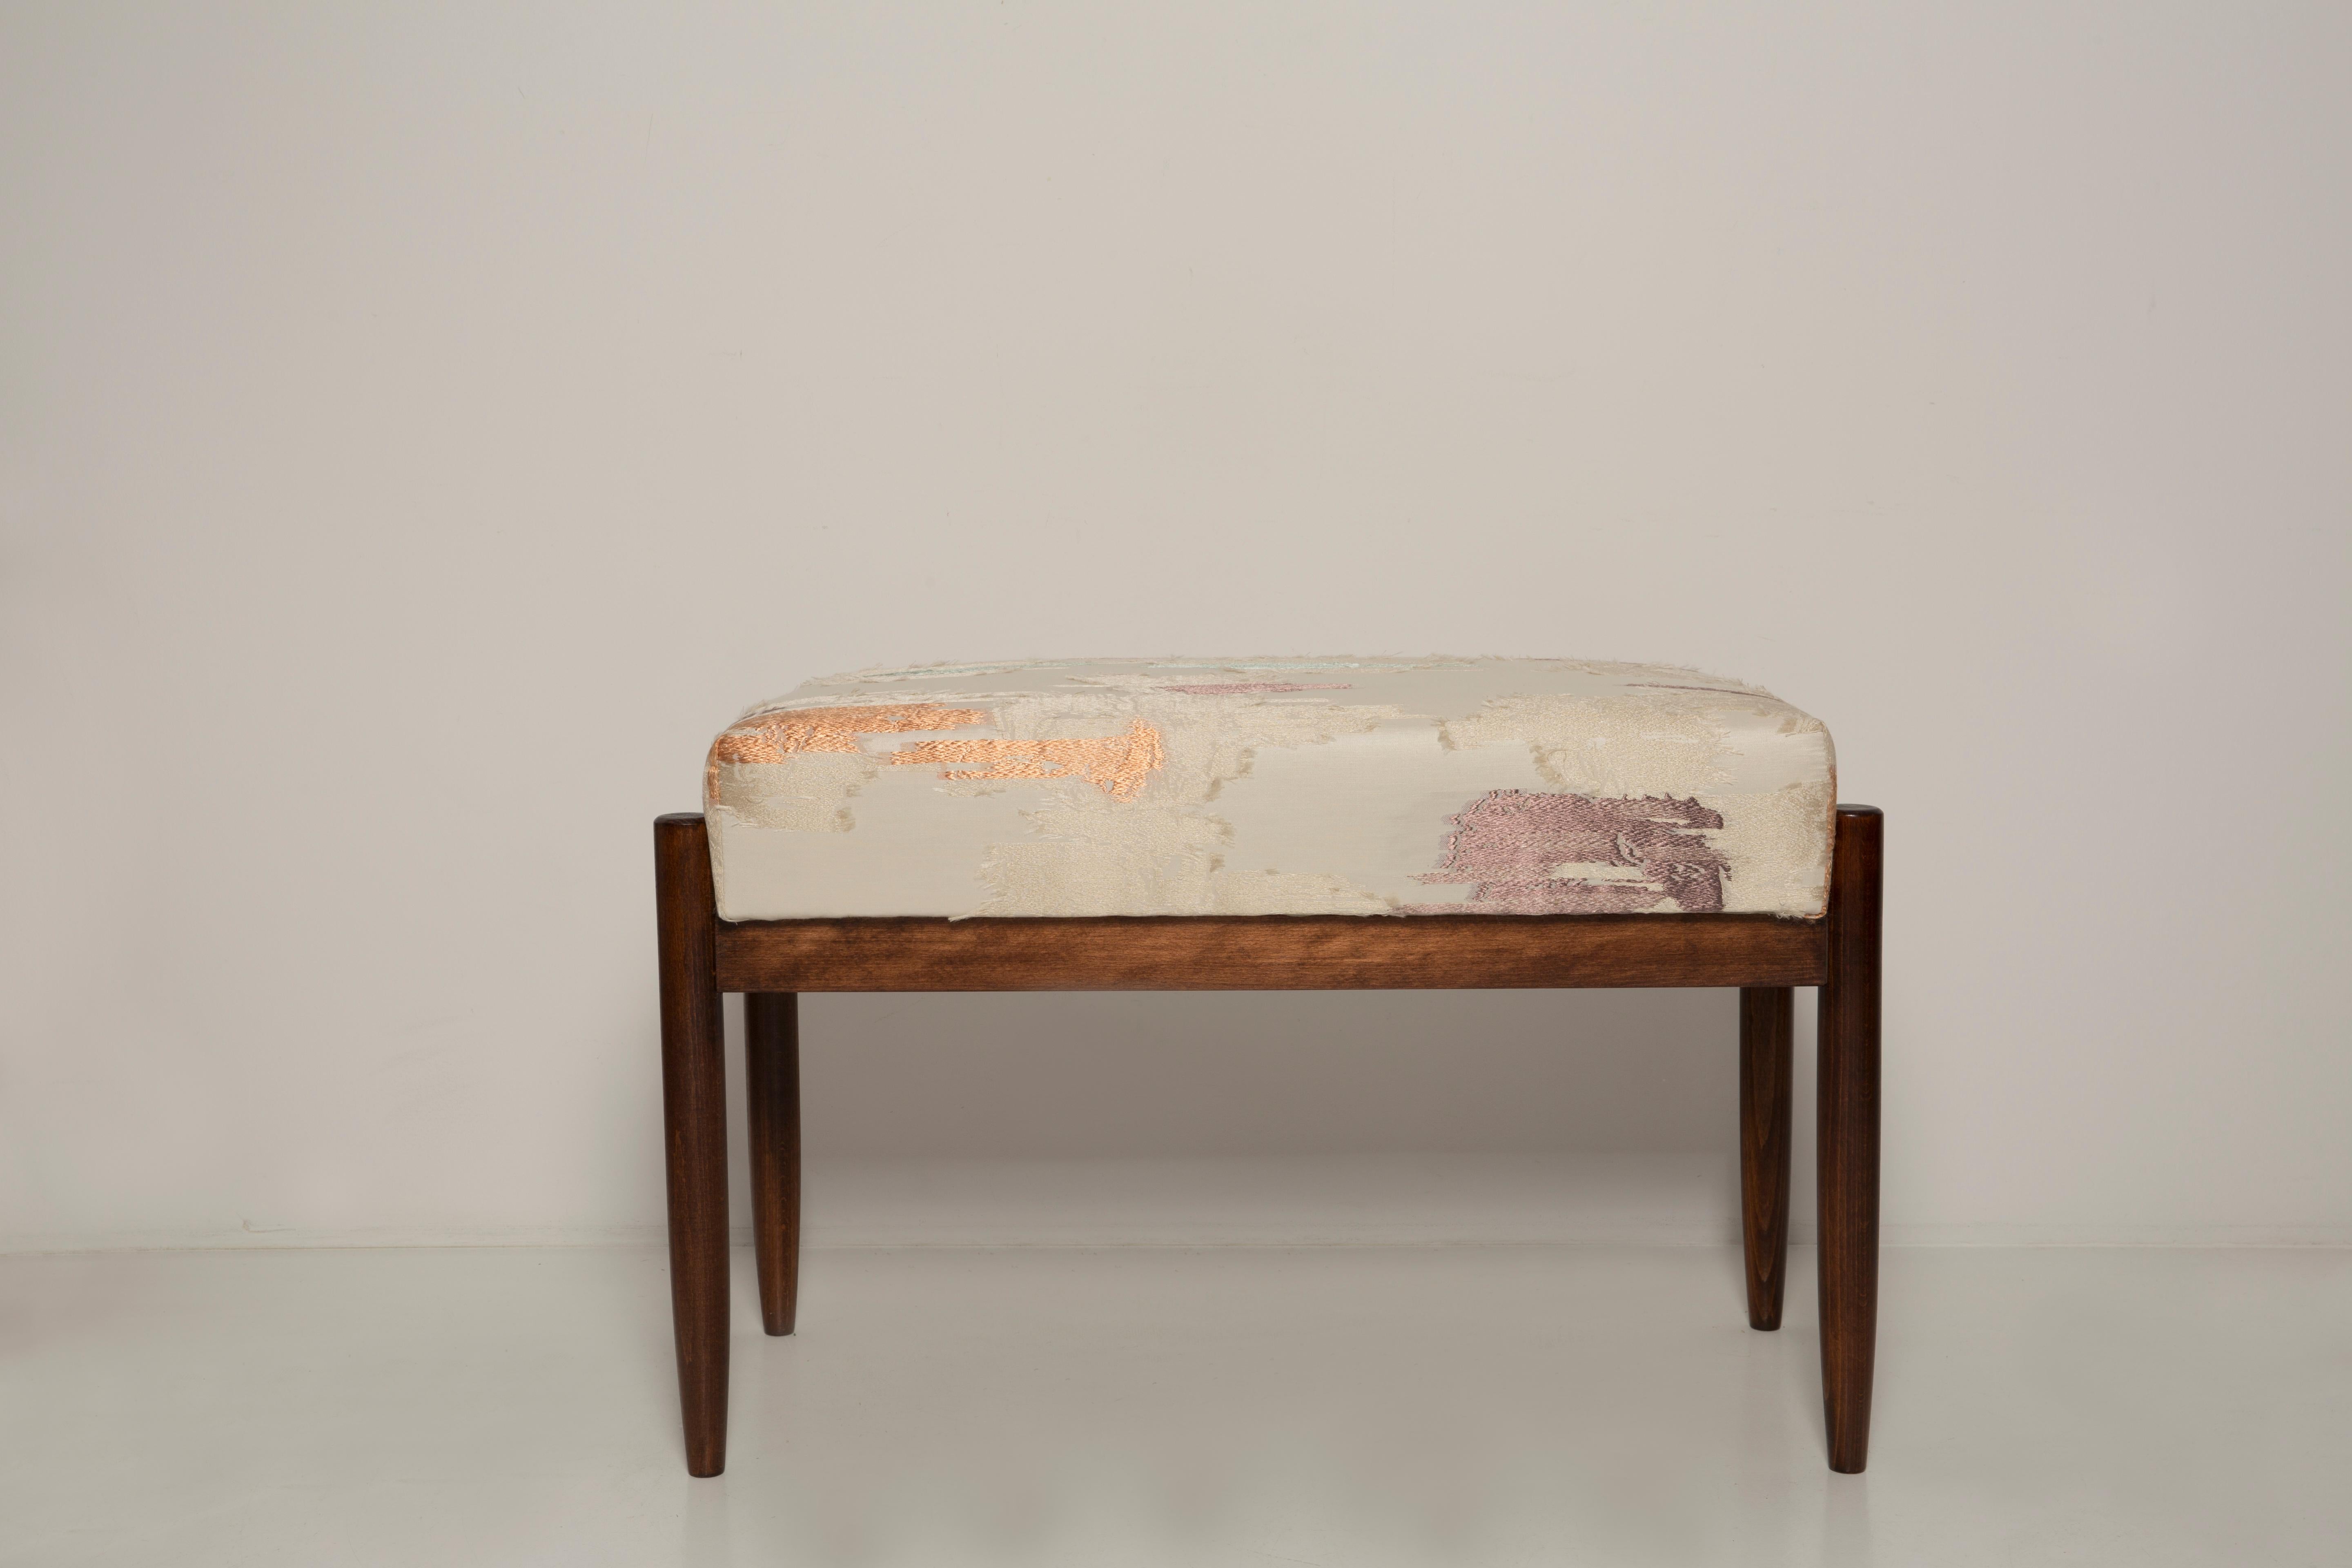 Contemporary Bench inspired of 1960s style. The bench consist of an upholstered part, a seat and wooden legs narrowing downwards, characteristic of the 1960s style.

Bench was designed by Vintola Studio, a Polish brand created by Ola Szewczul,